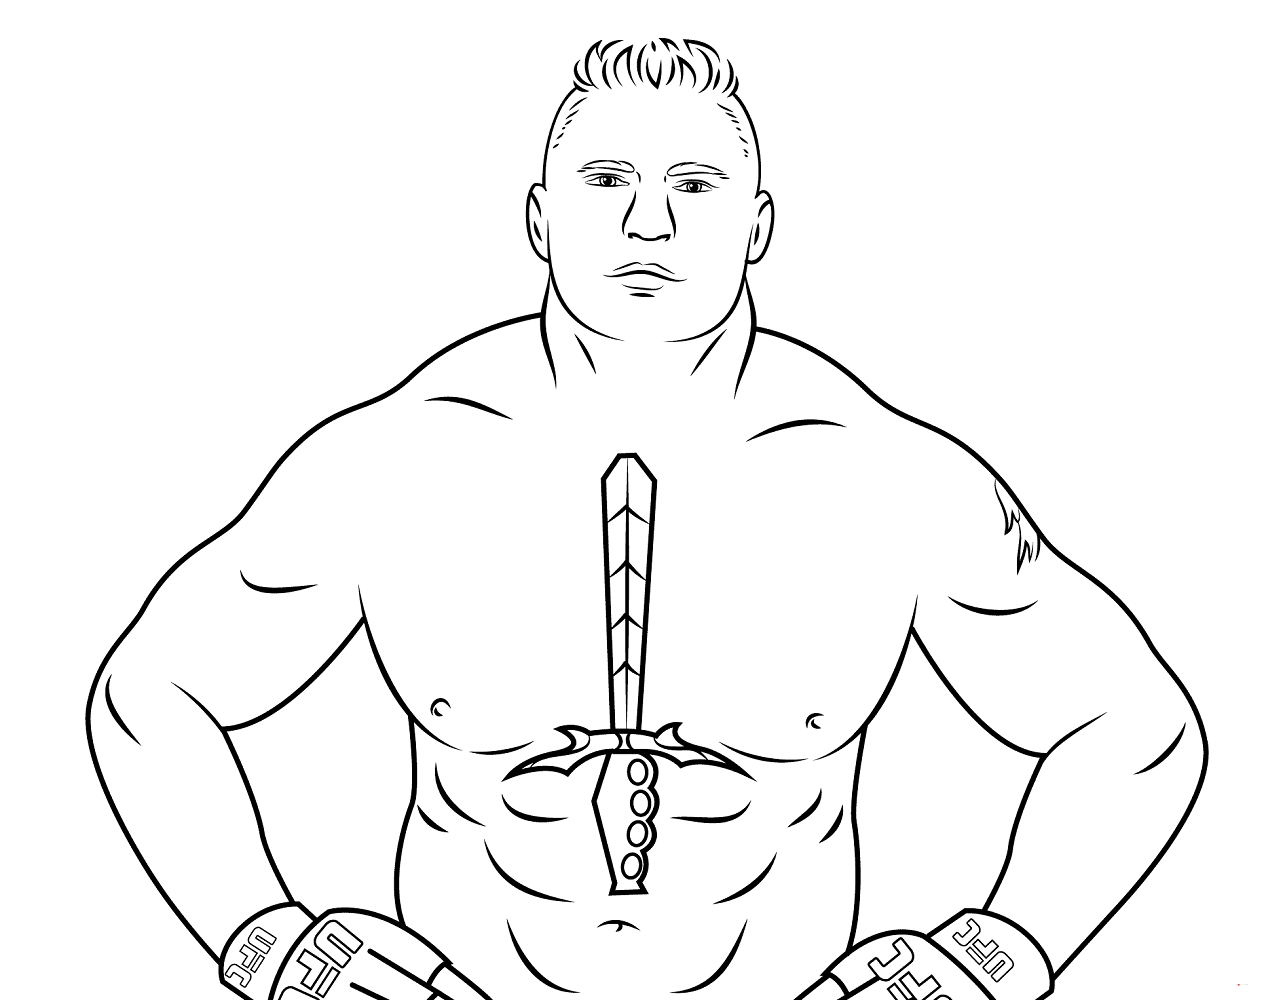 wwe-coloring-pages-roman-reigns-26-best-ideas-for-coloring-wwe